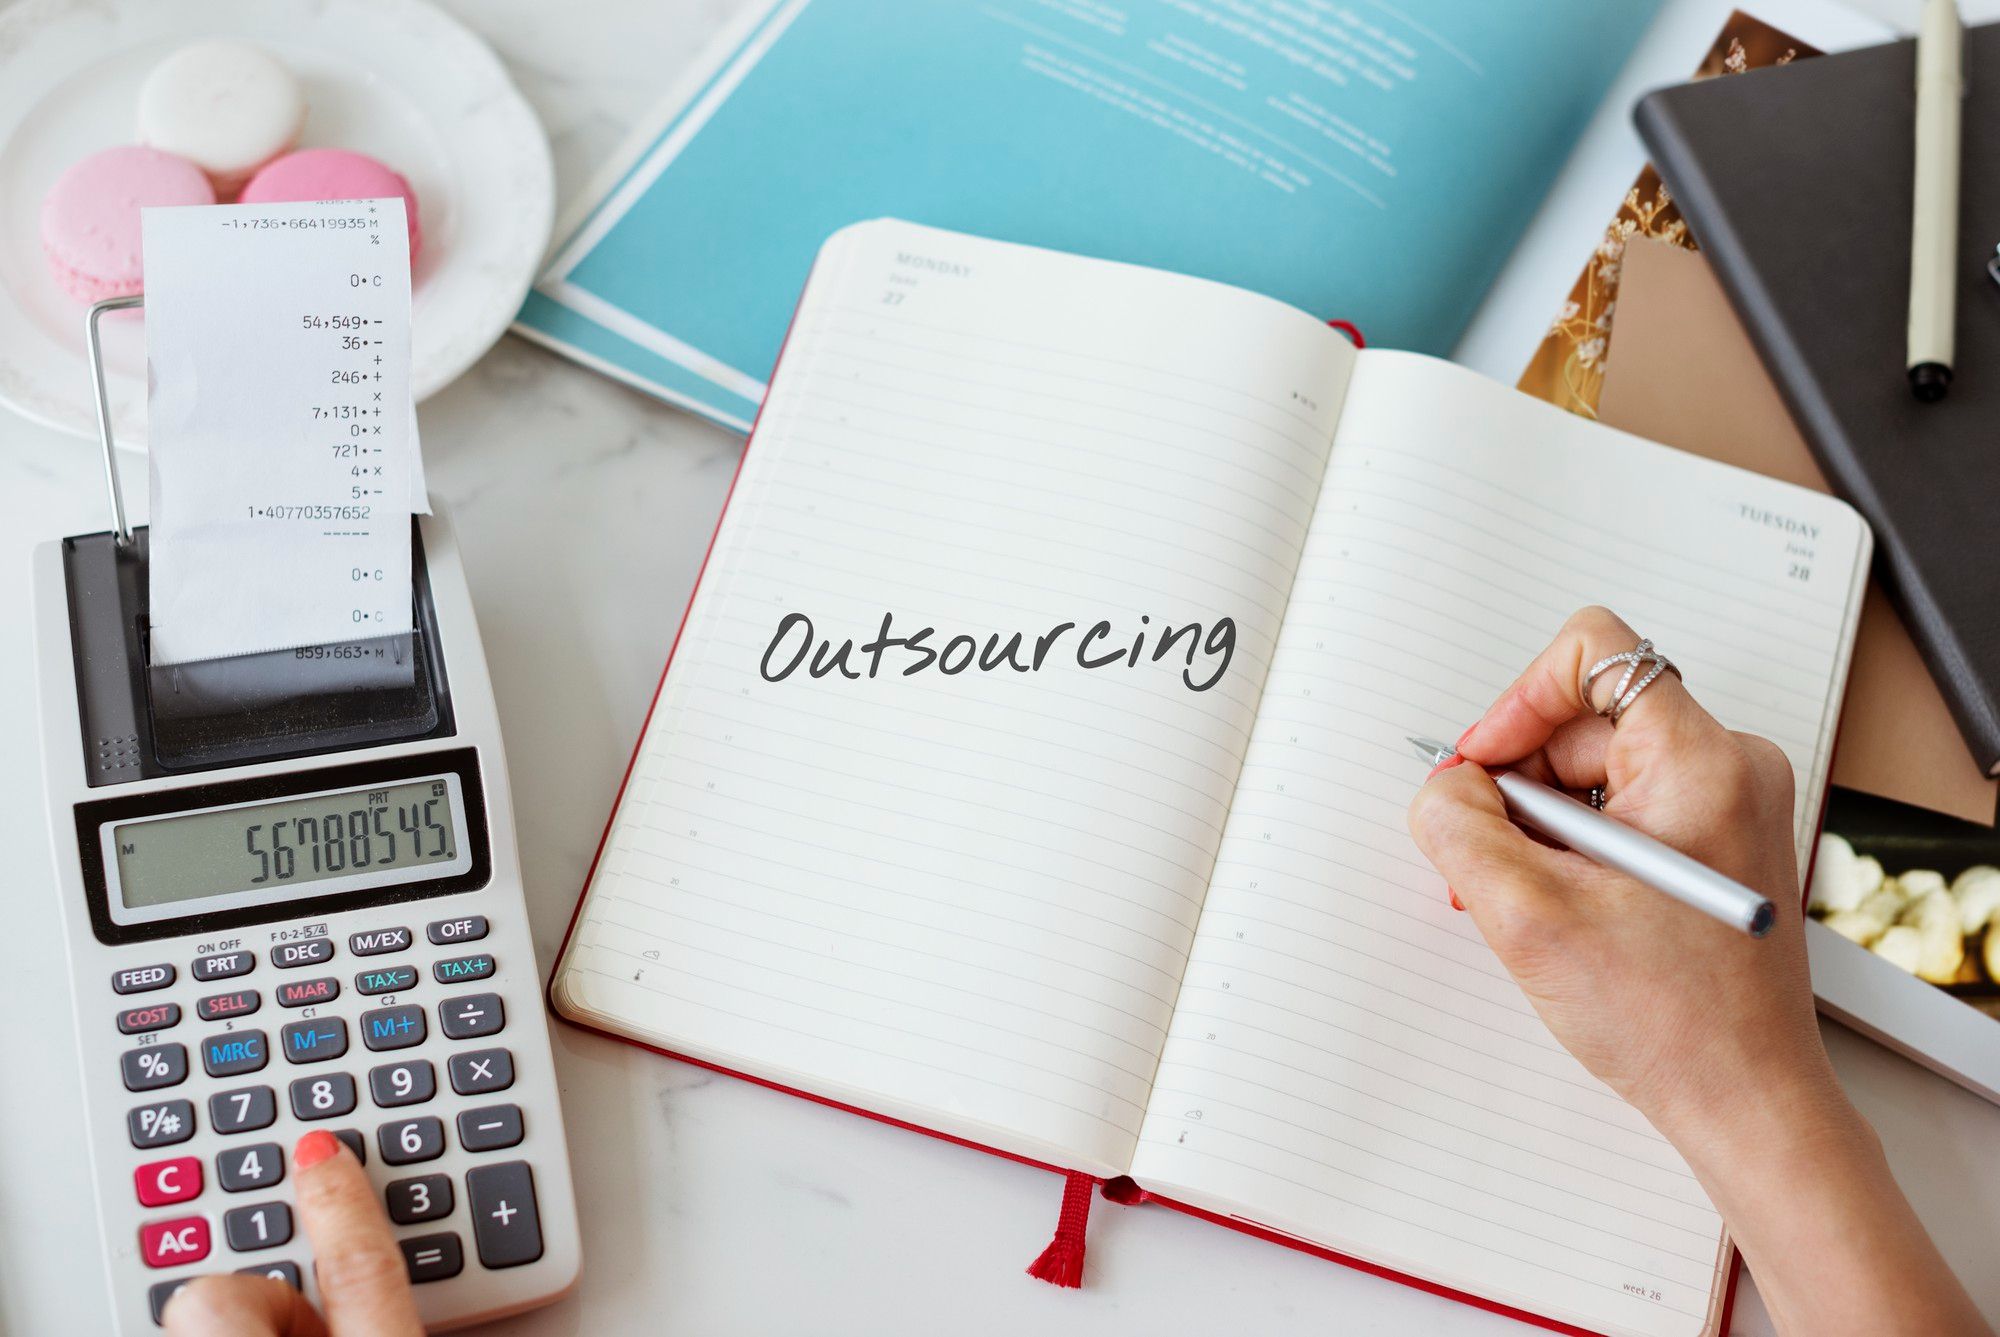 How Can Outsourcing Help Combat Inflation?